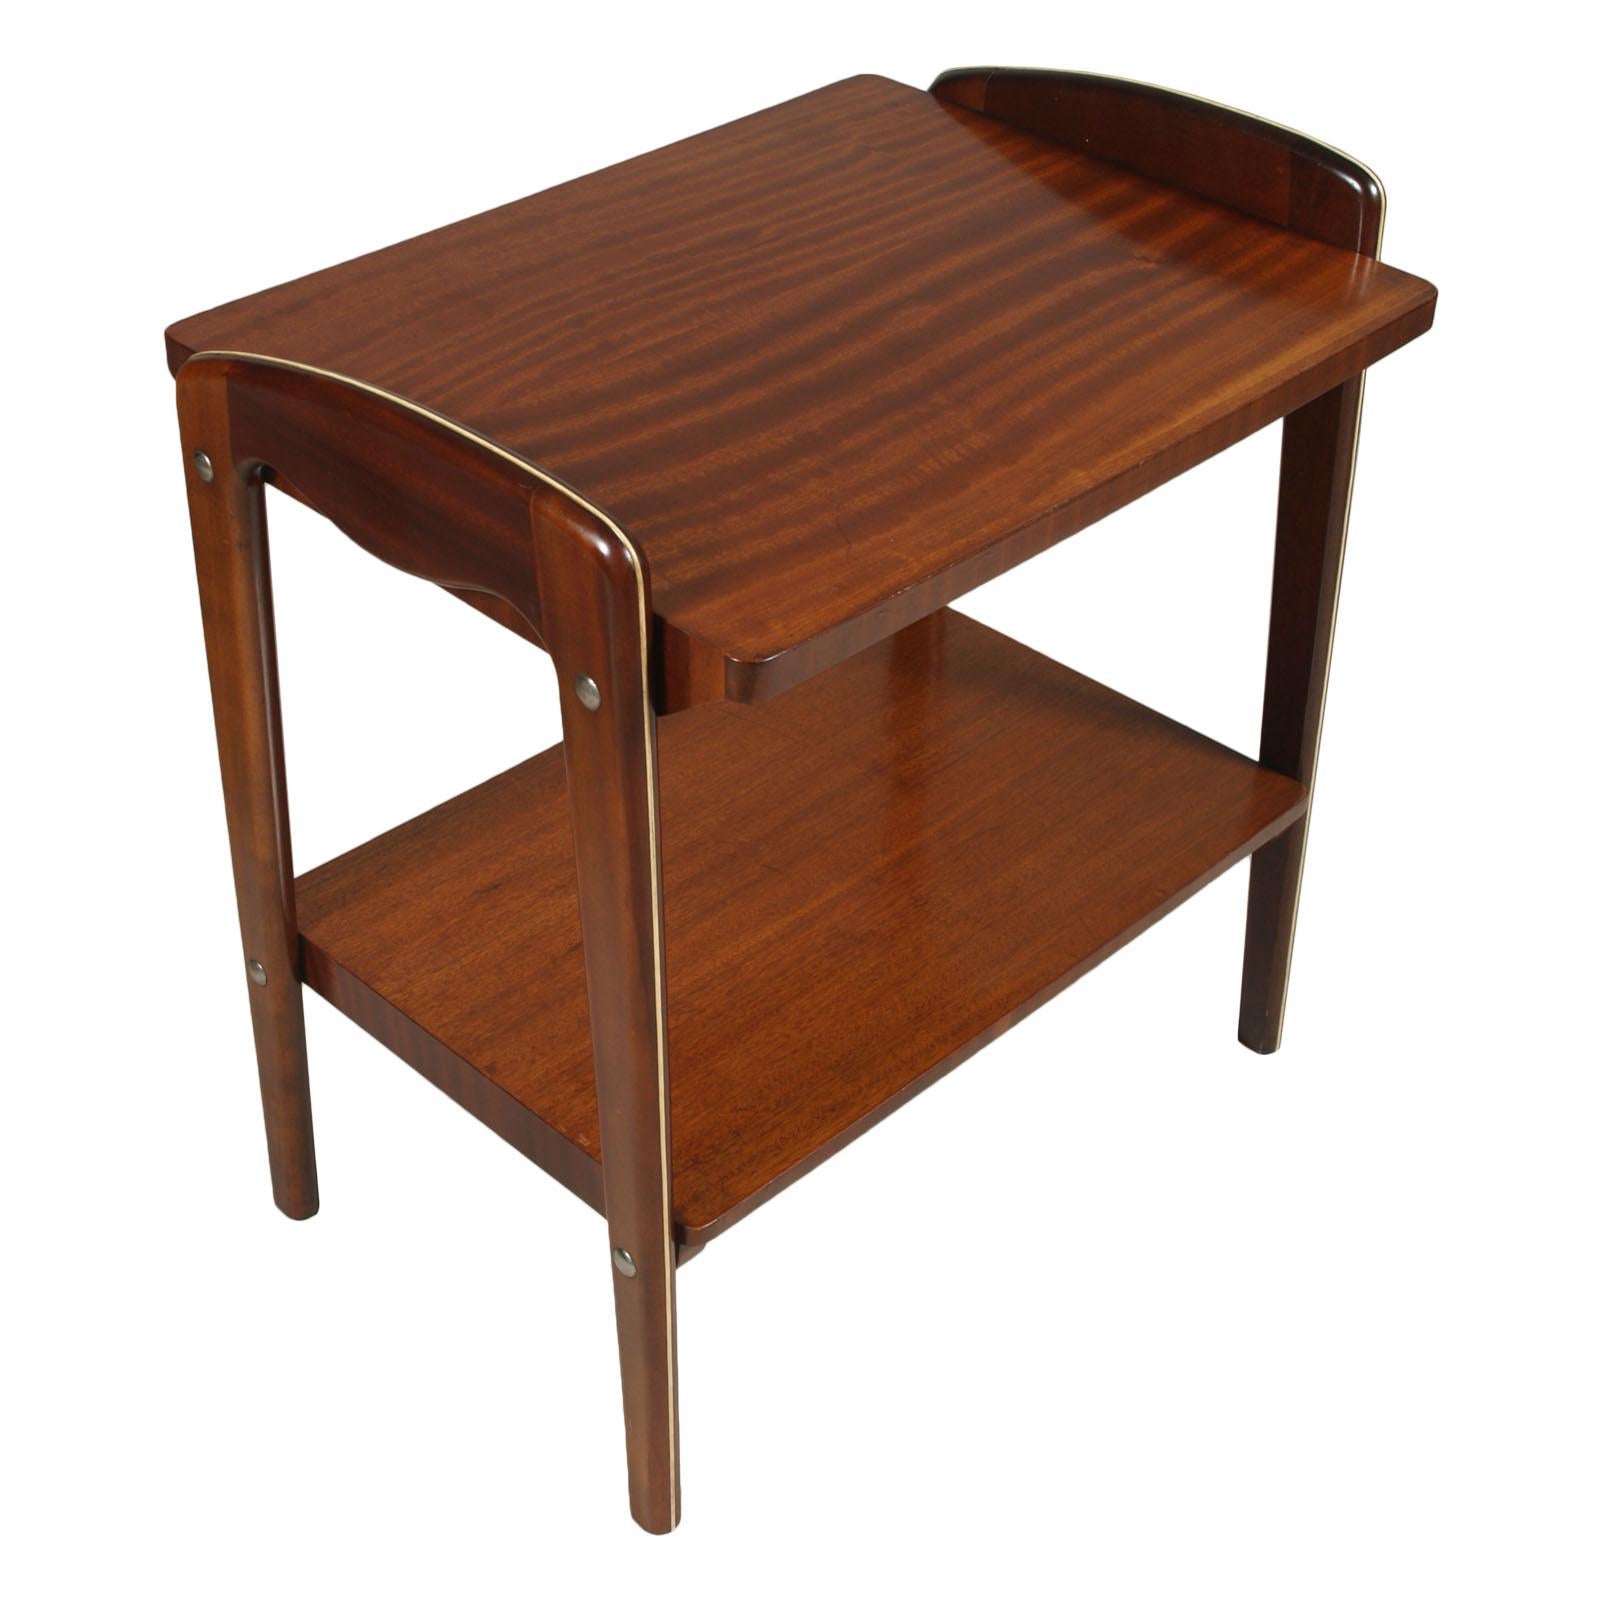 Italy Mid-Century Modern occasional table, console, Gio Ponti attributed by Consorzio Mobili di Cantu. In mahogany, wax-polished
Measures cm: H 79, W 71, D 52.